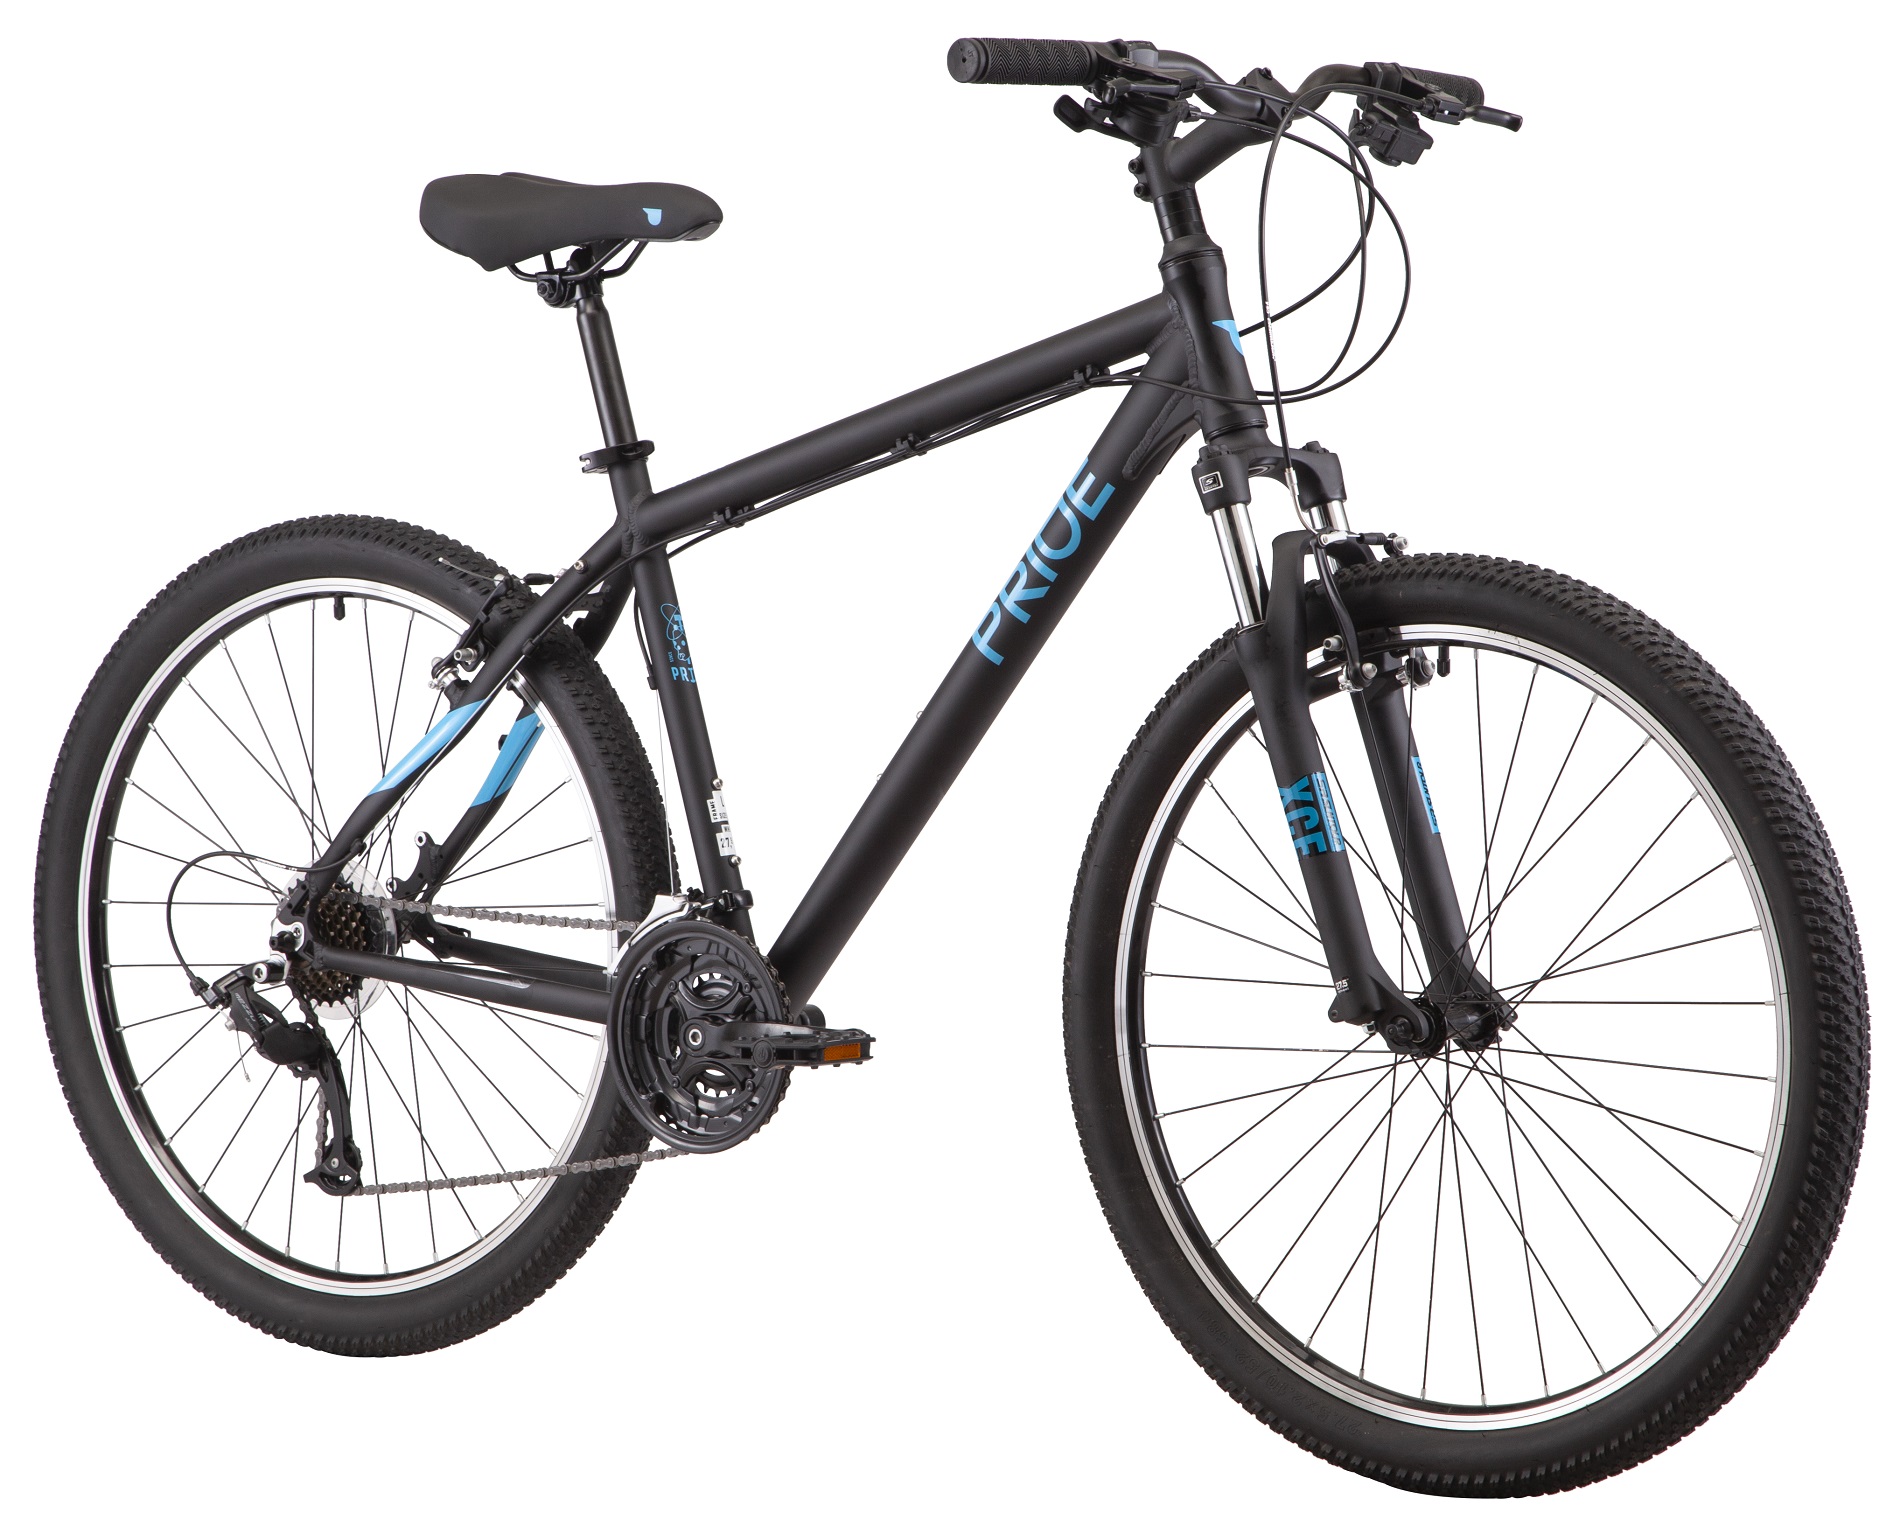 27.5" PRIDE MARVEL 7.1 frame - L 2022 Black (rear and front switches and tamnet - Microshift) Photo 2